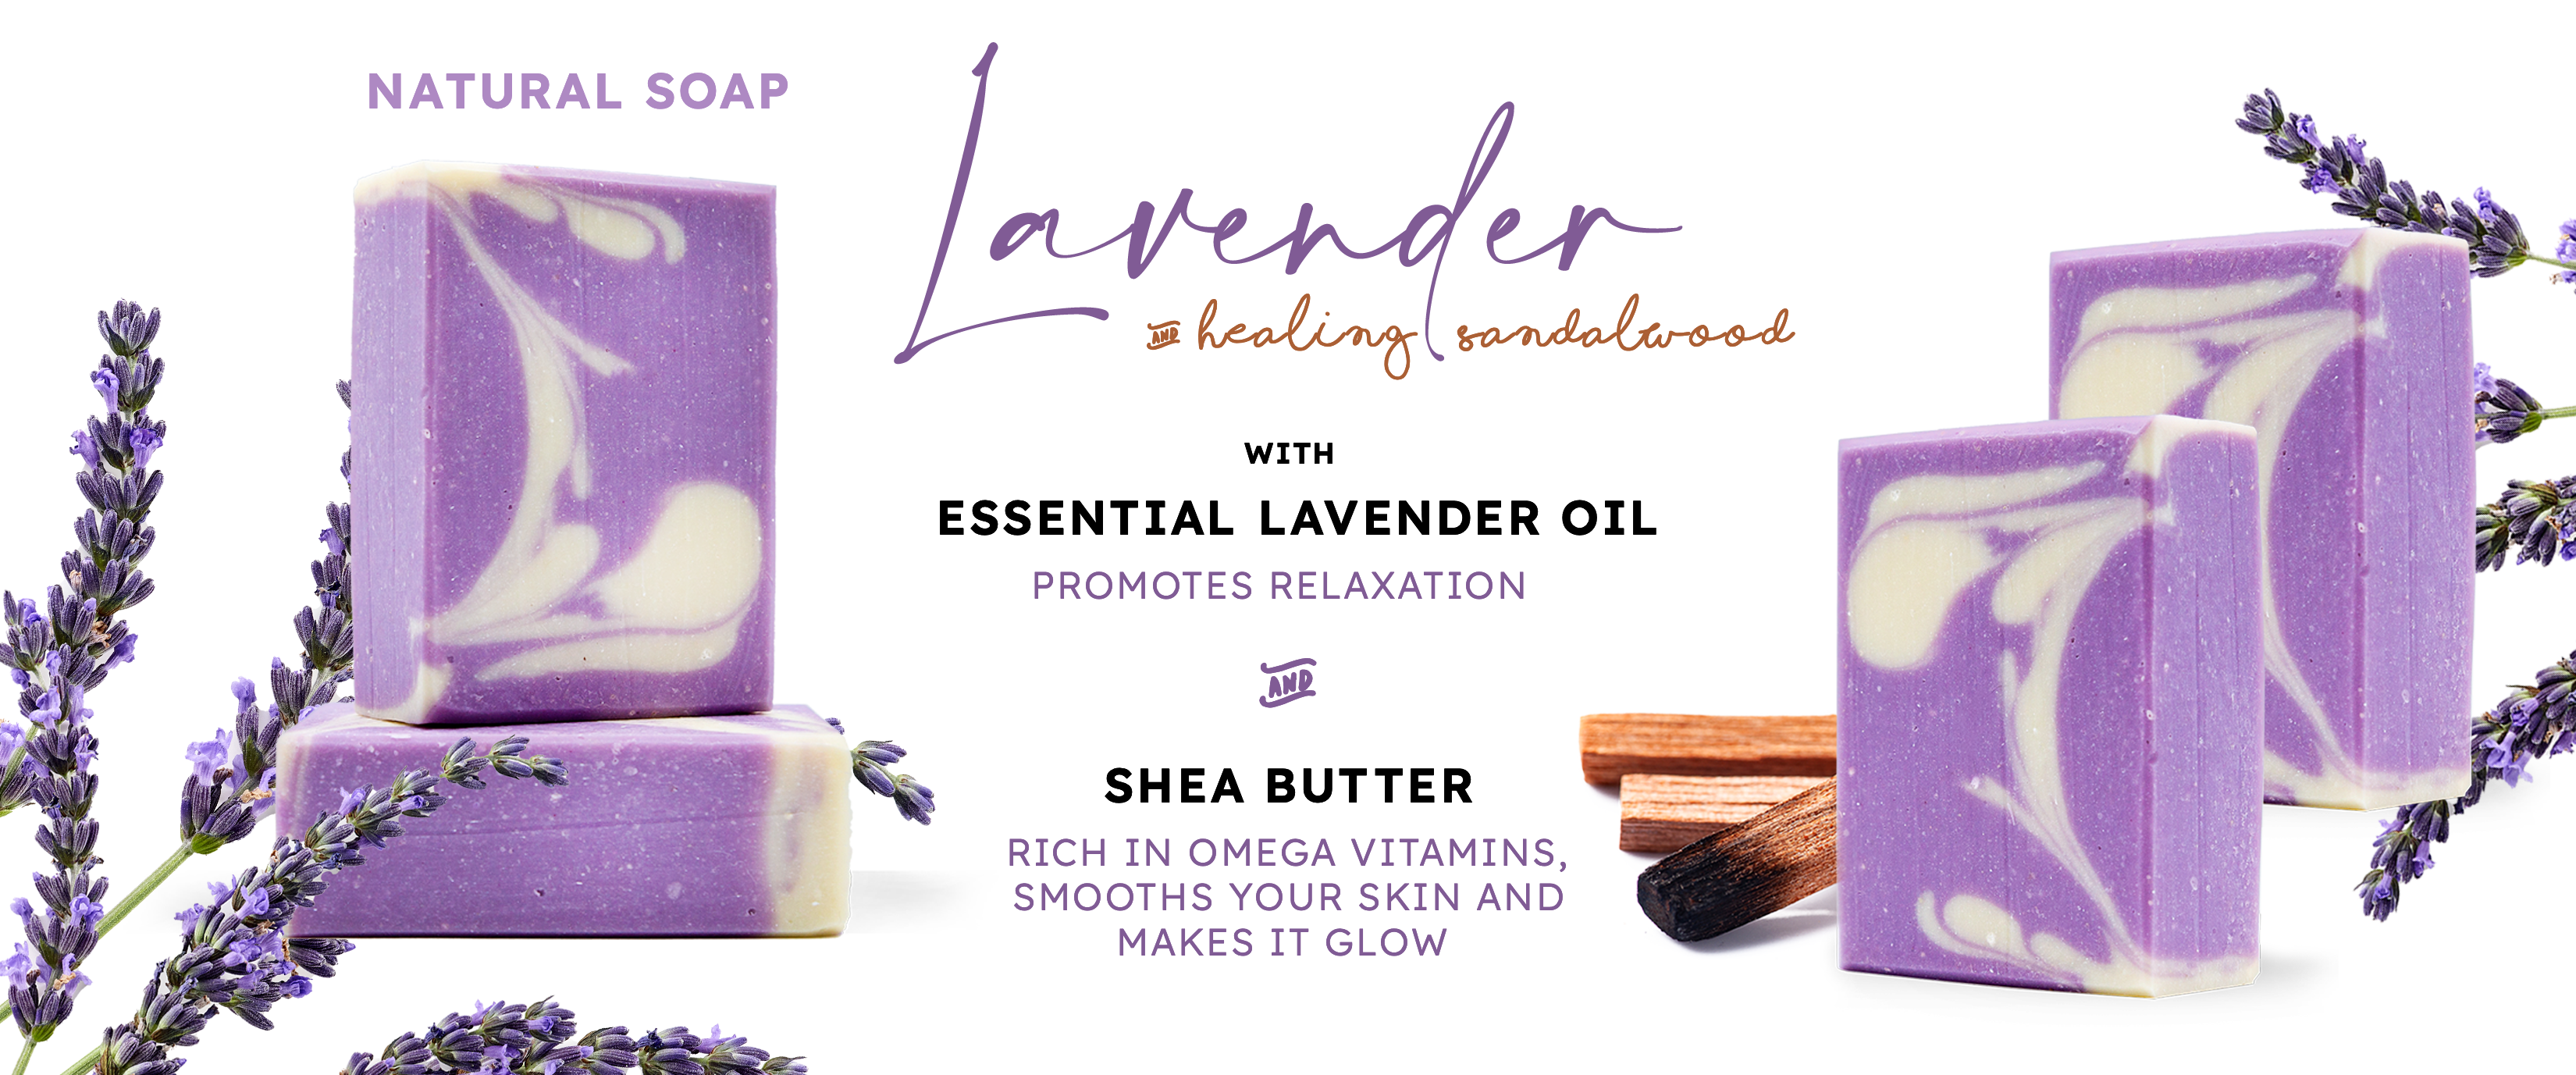 Lavender Sandalwood Luxury Soap Bar available by subscription!